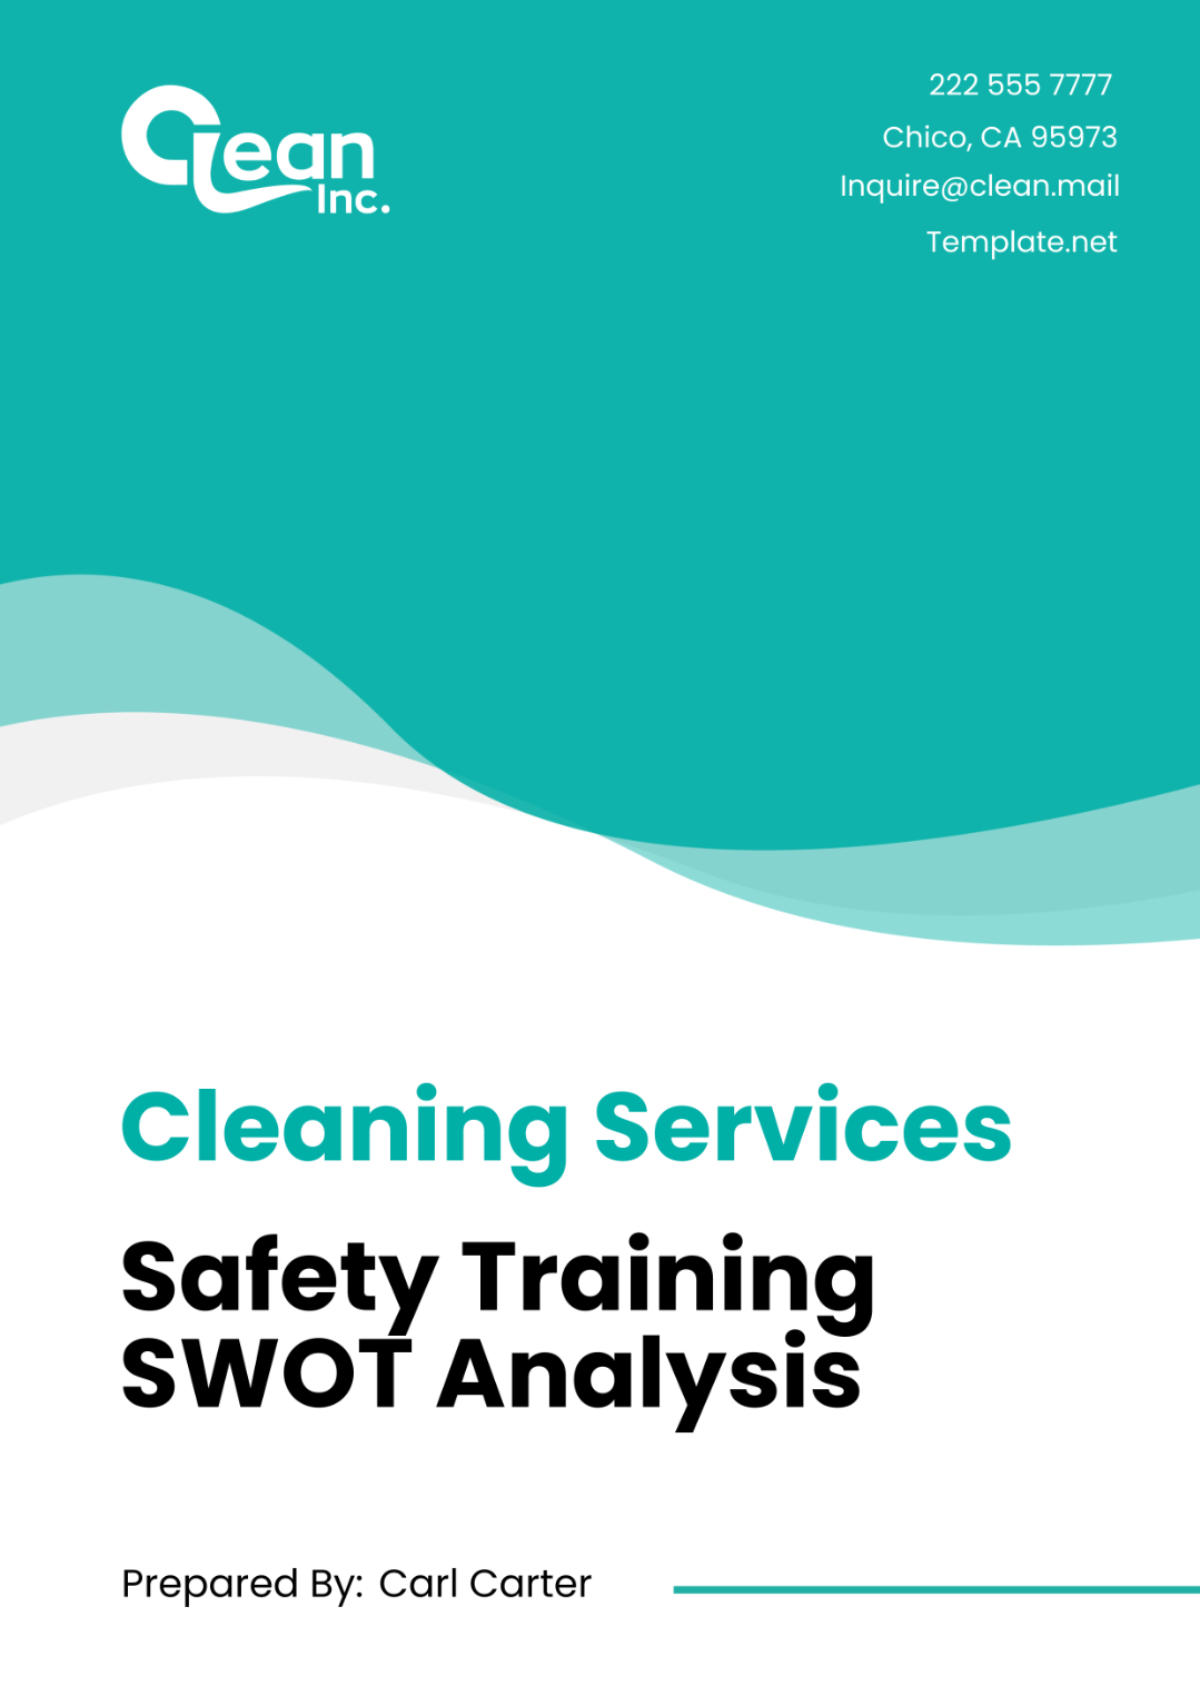 Cleaning Services Safety Training SWOT Analysis Template